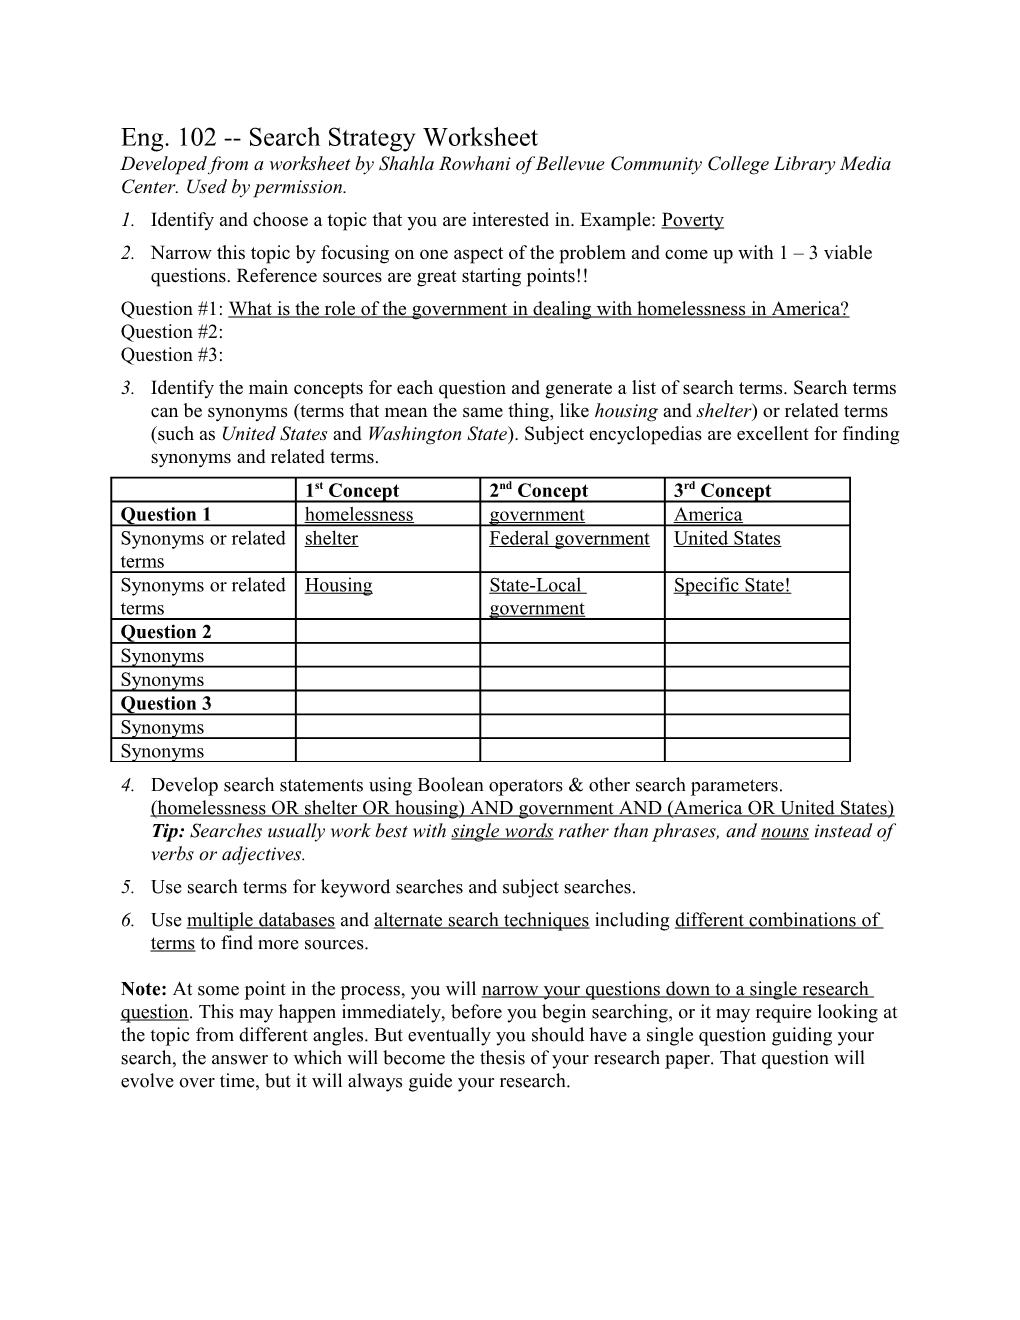 Eng. 102 Search Strategy Worksheet